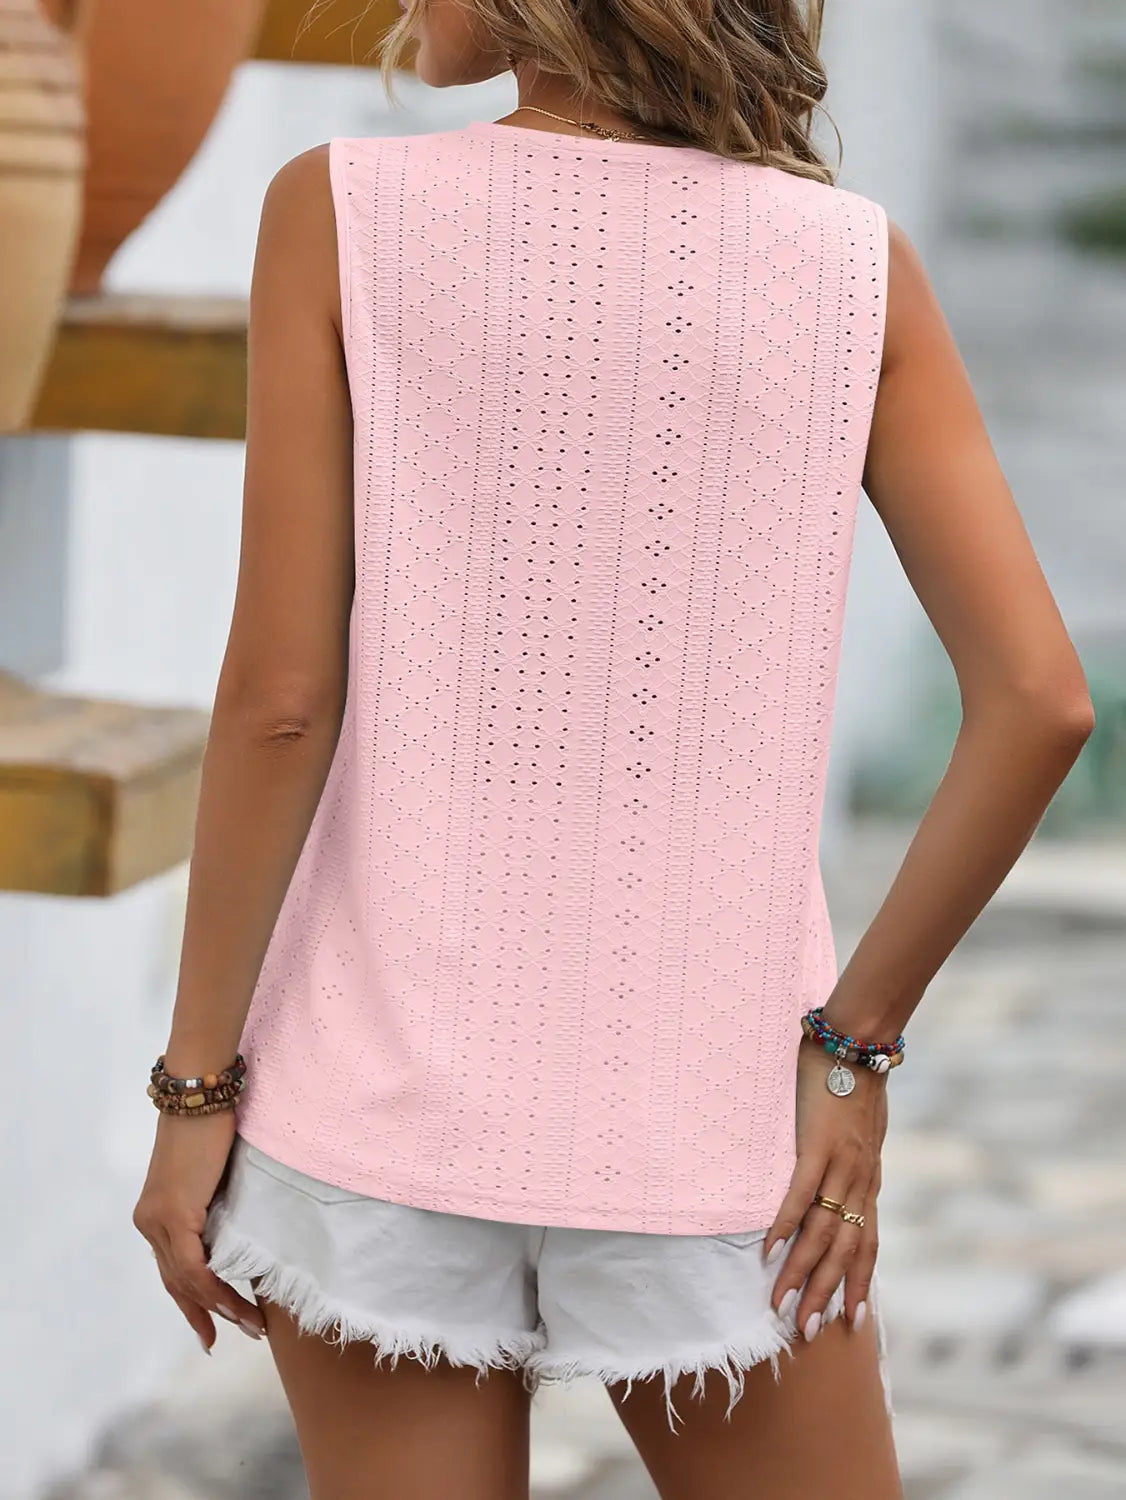 Lace Tops Women V-neck Sleeveless Hollow Out Vest Summer